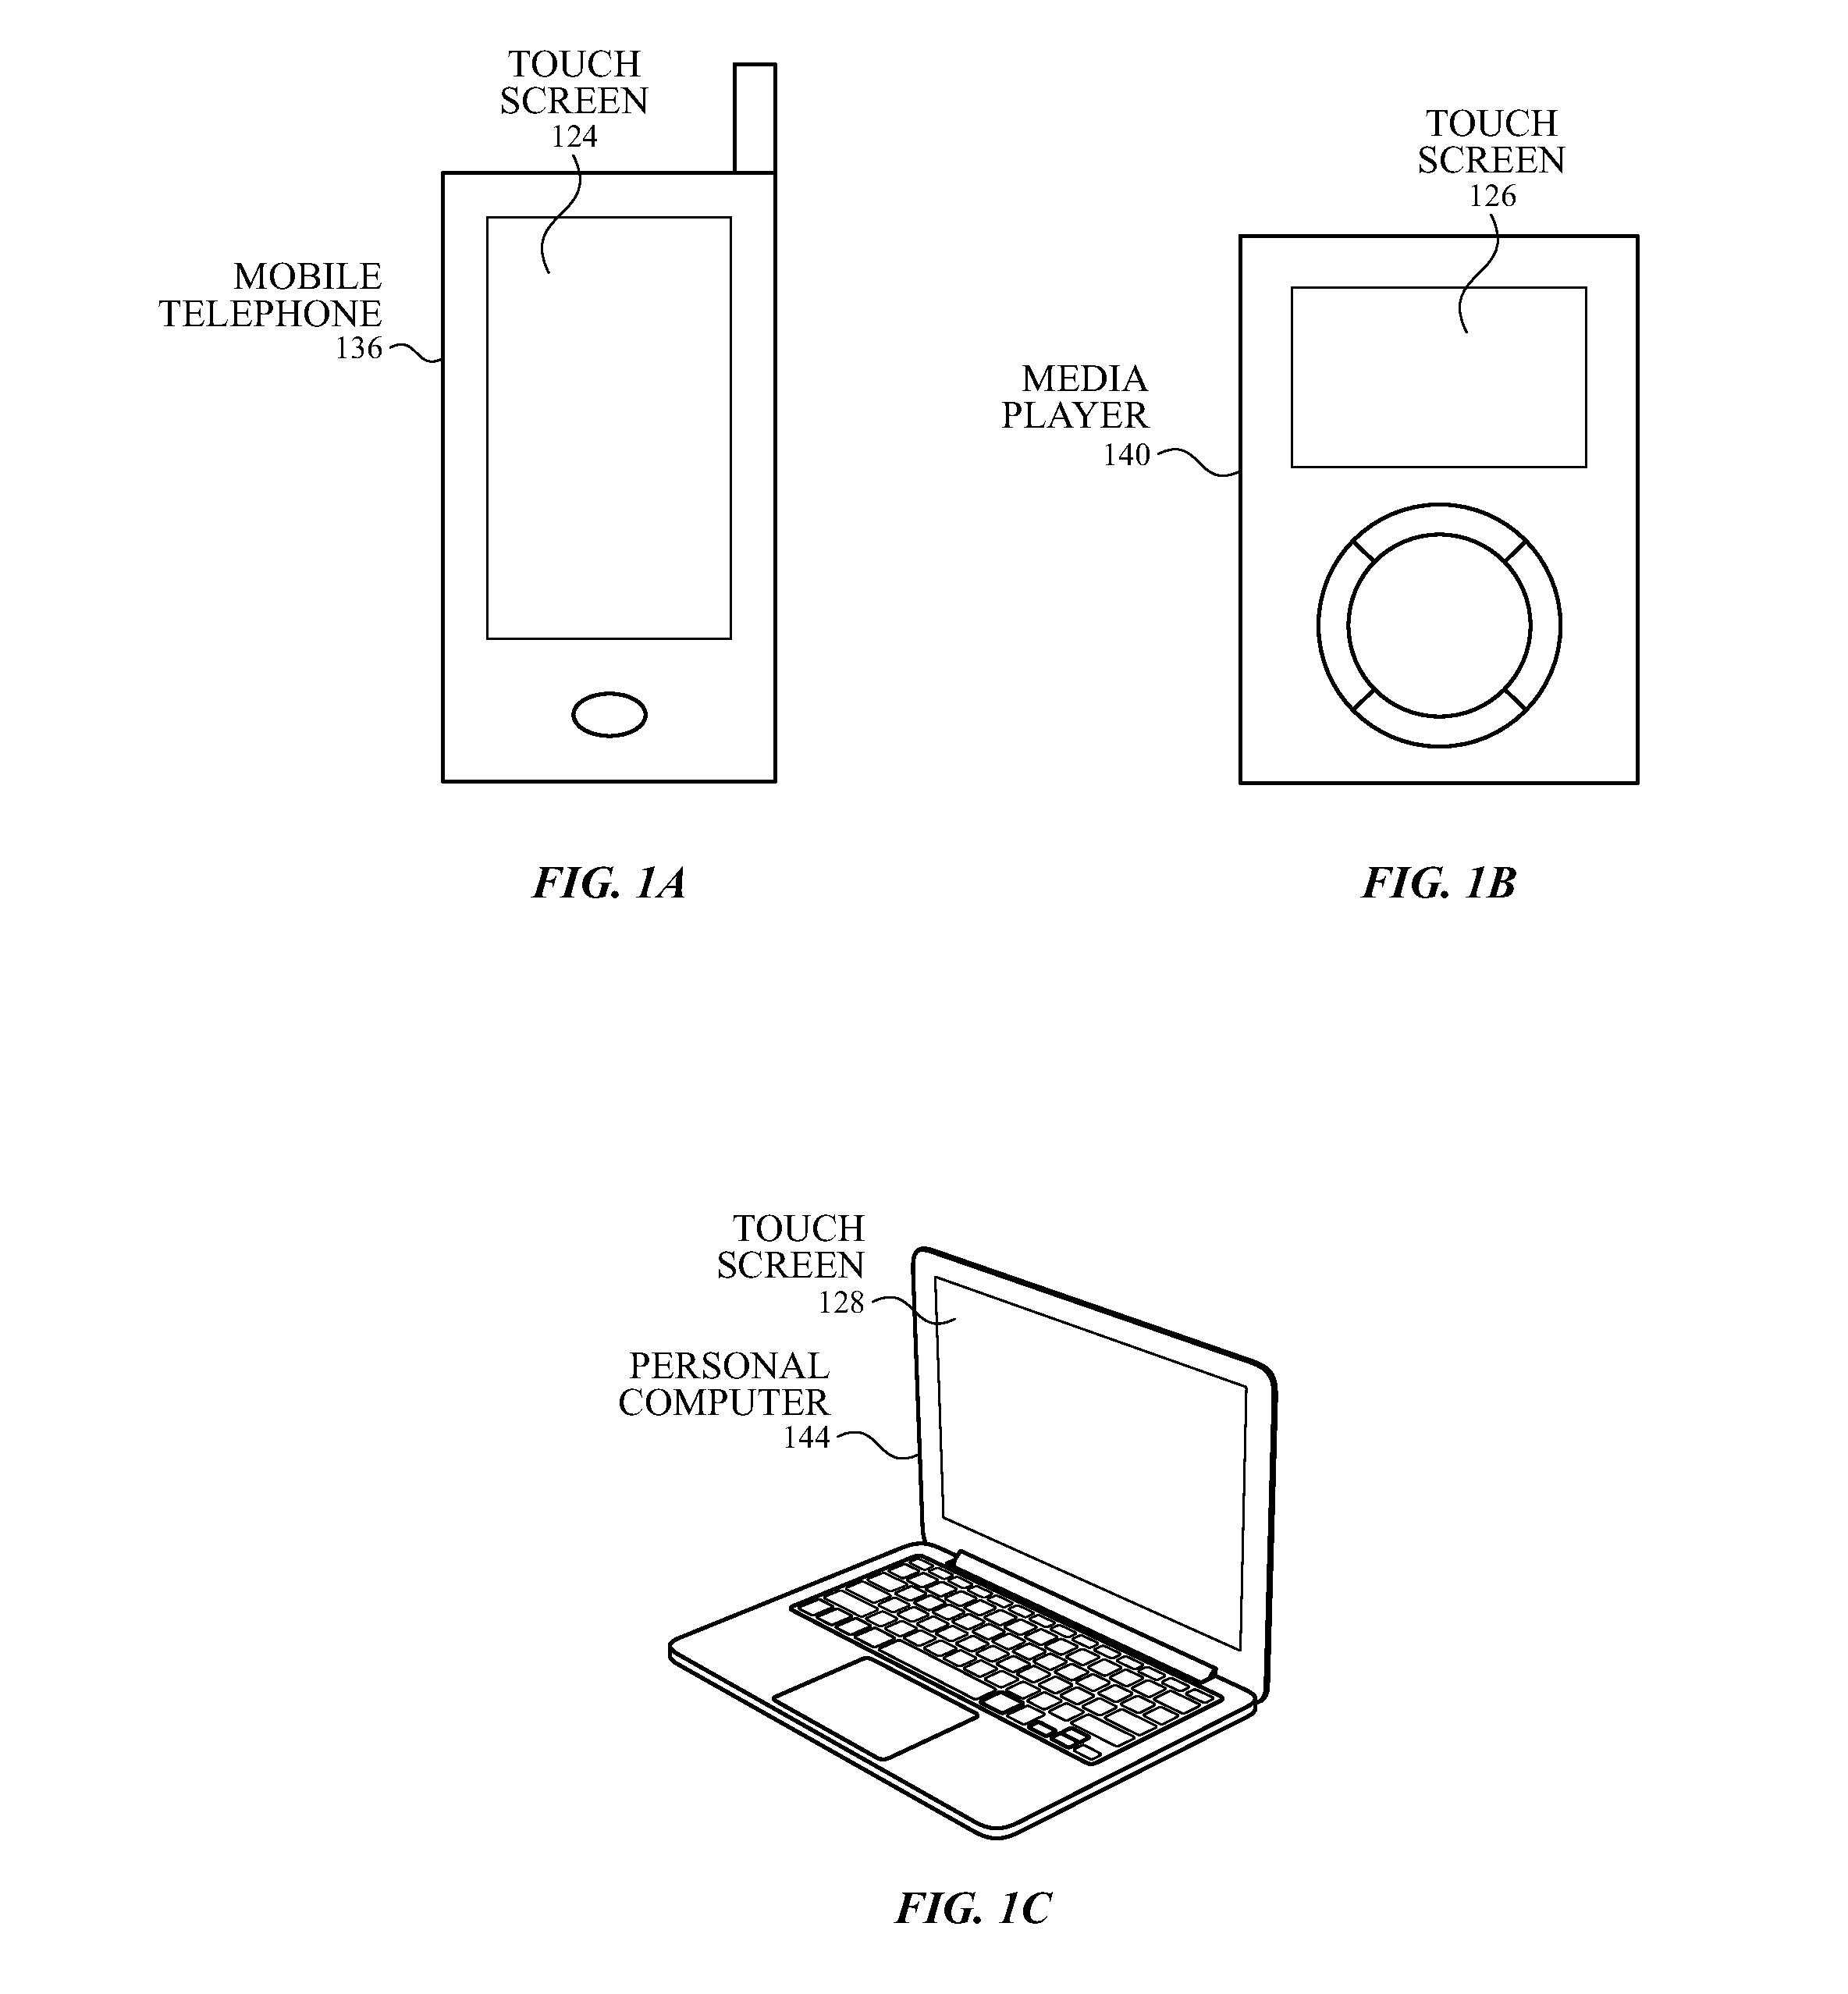 Charge pump having ac and DC outputs for touch panel bootstrapping and substrate biasing